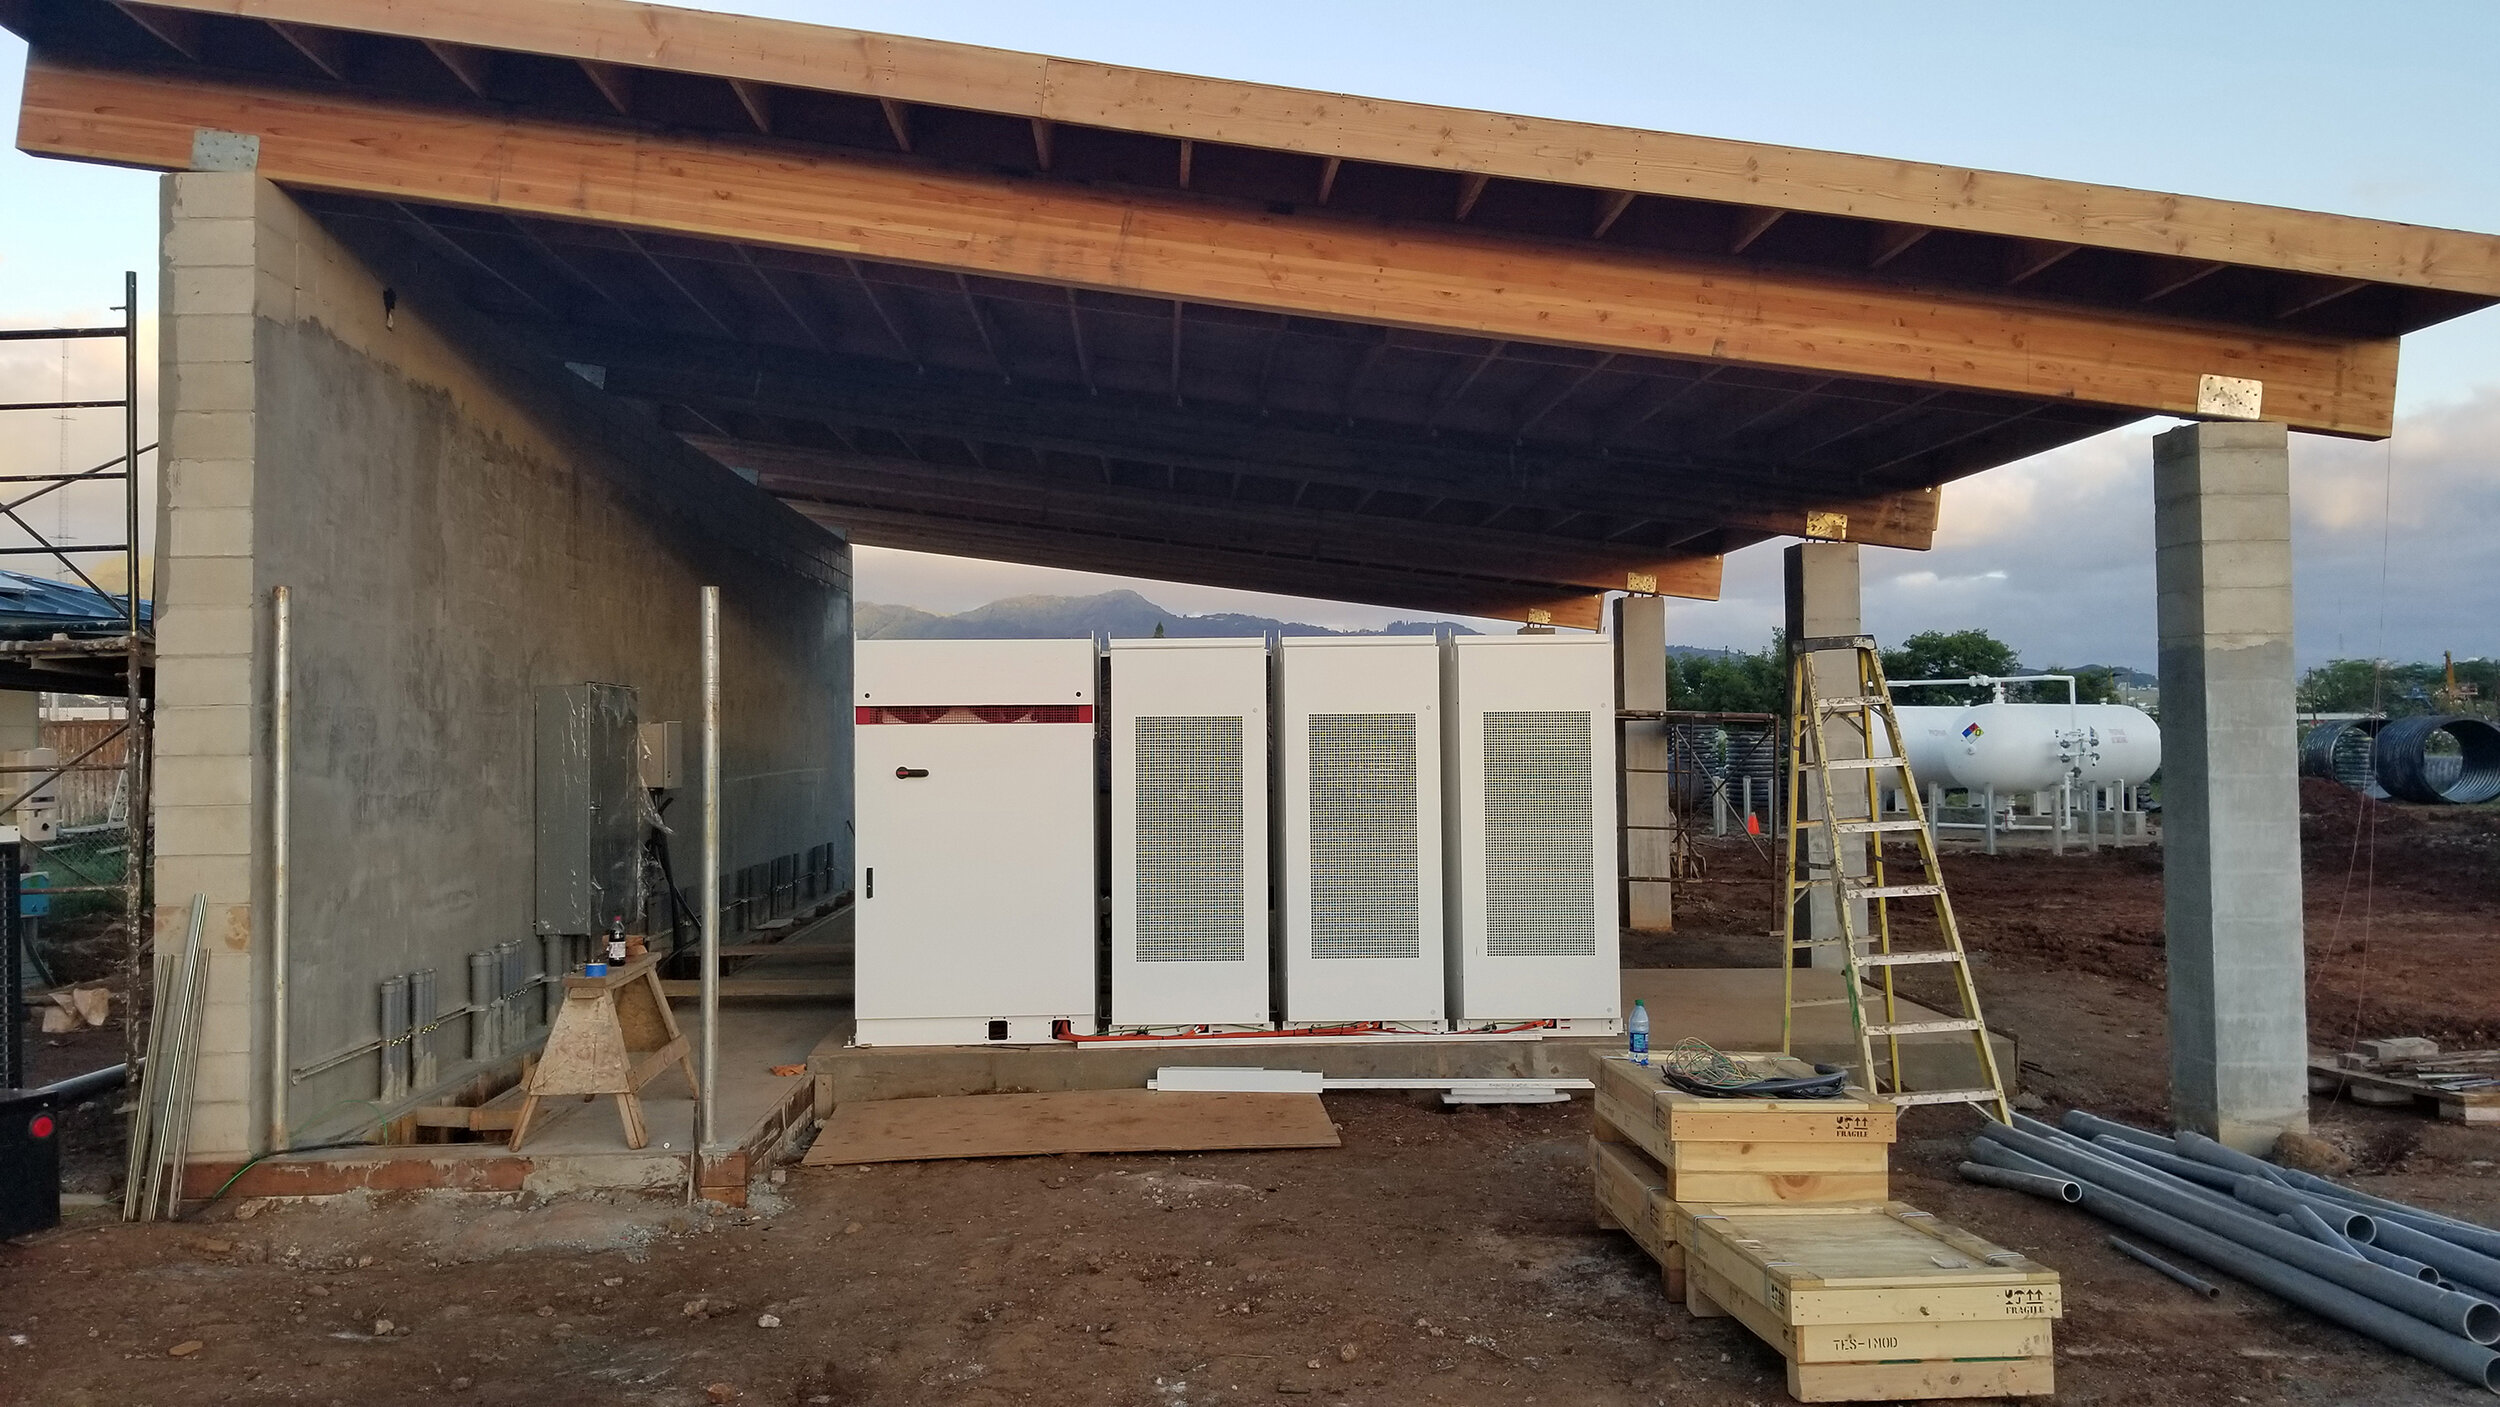  Battery Energy Storage System (BESS) under construction. 